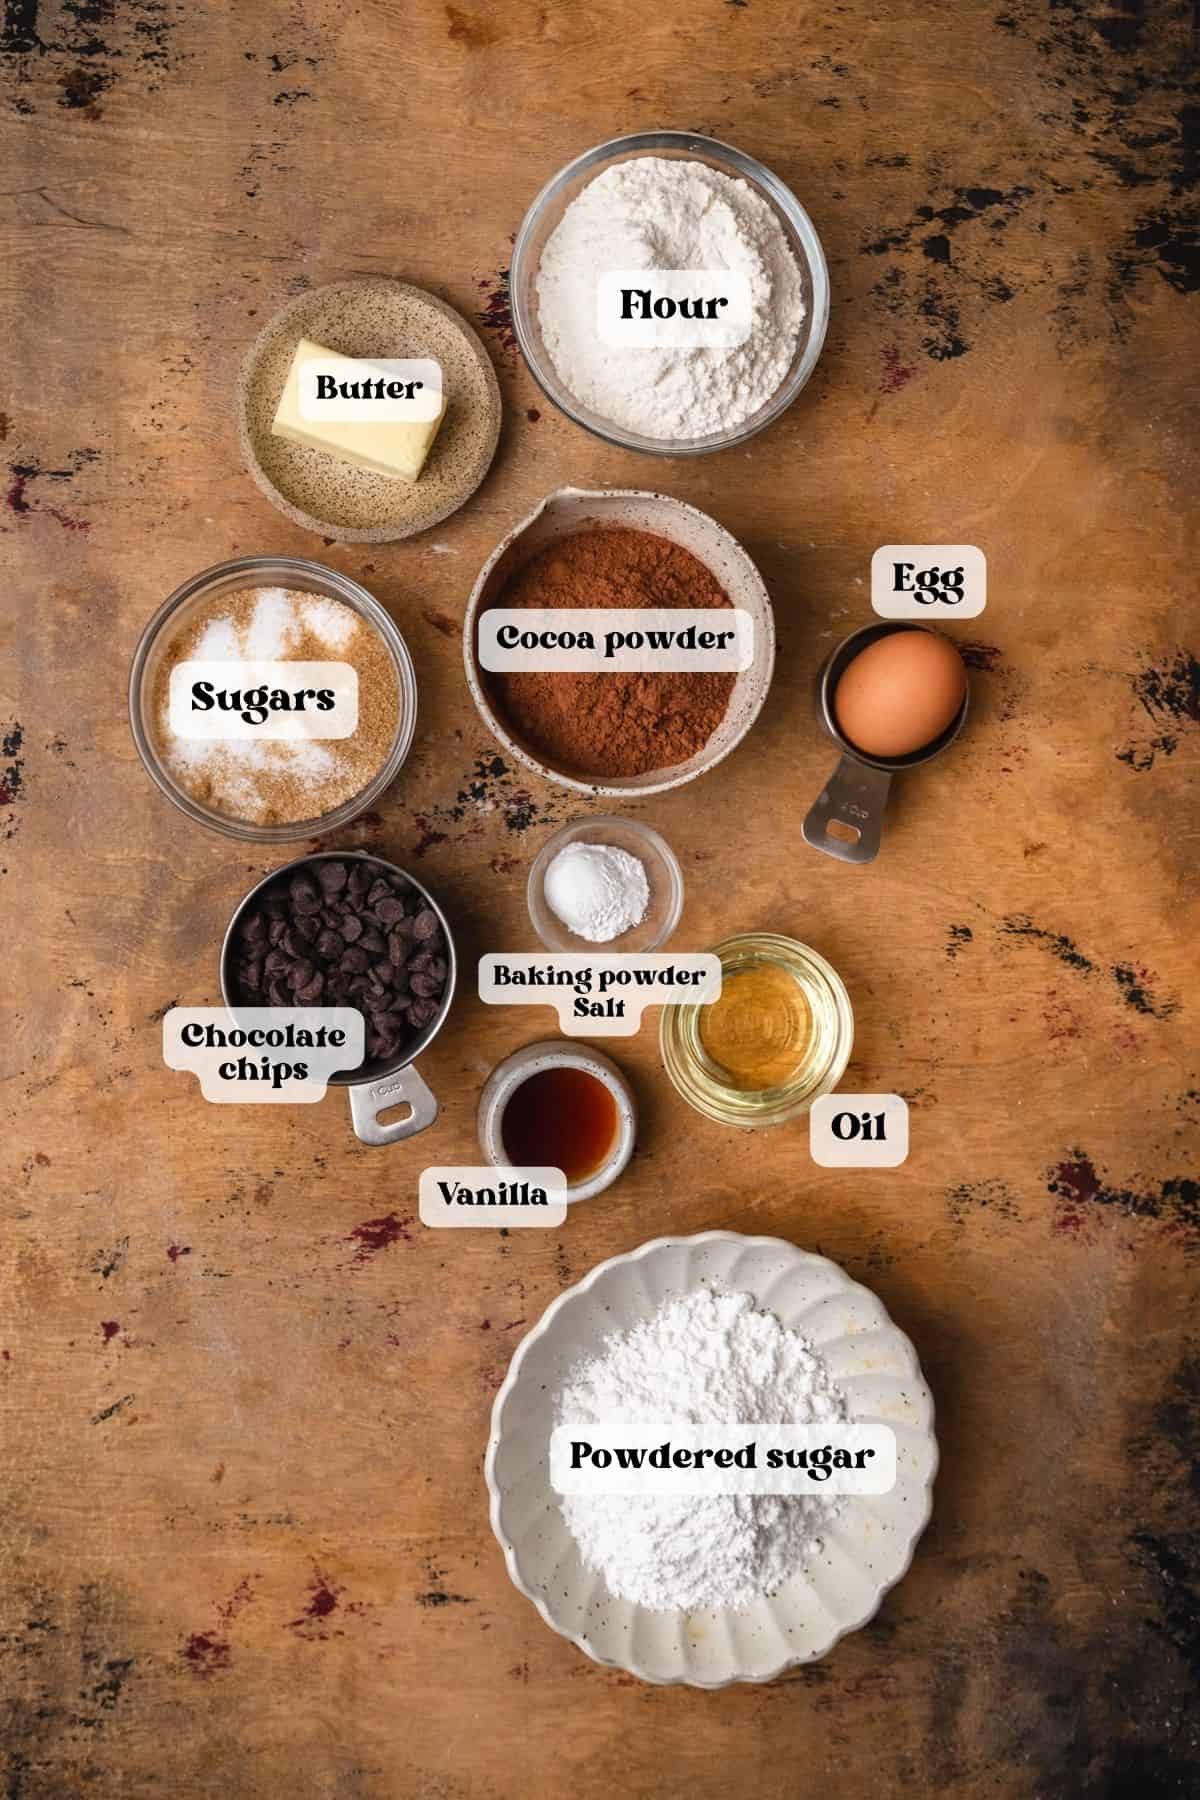 Ingredients to make chocolate snowstorm cookies on a wood surface.